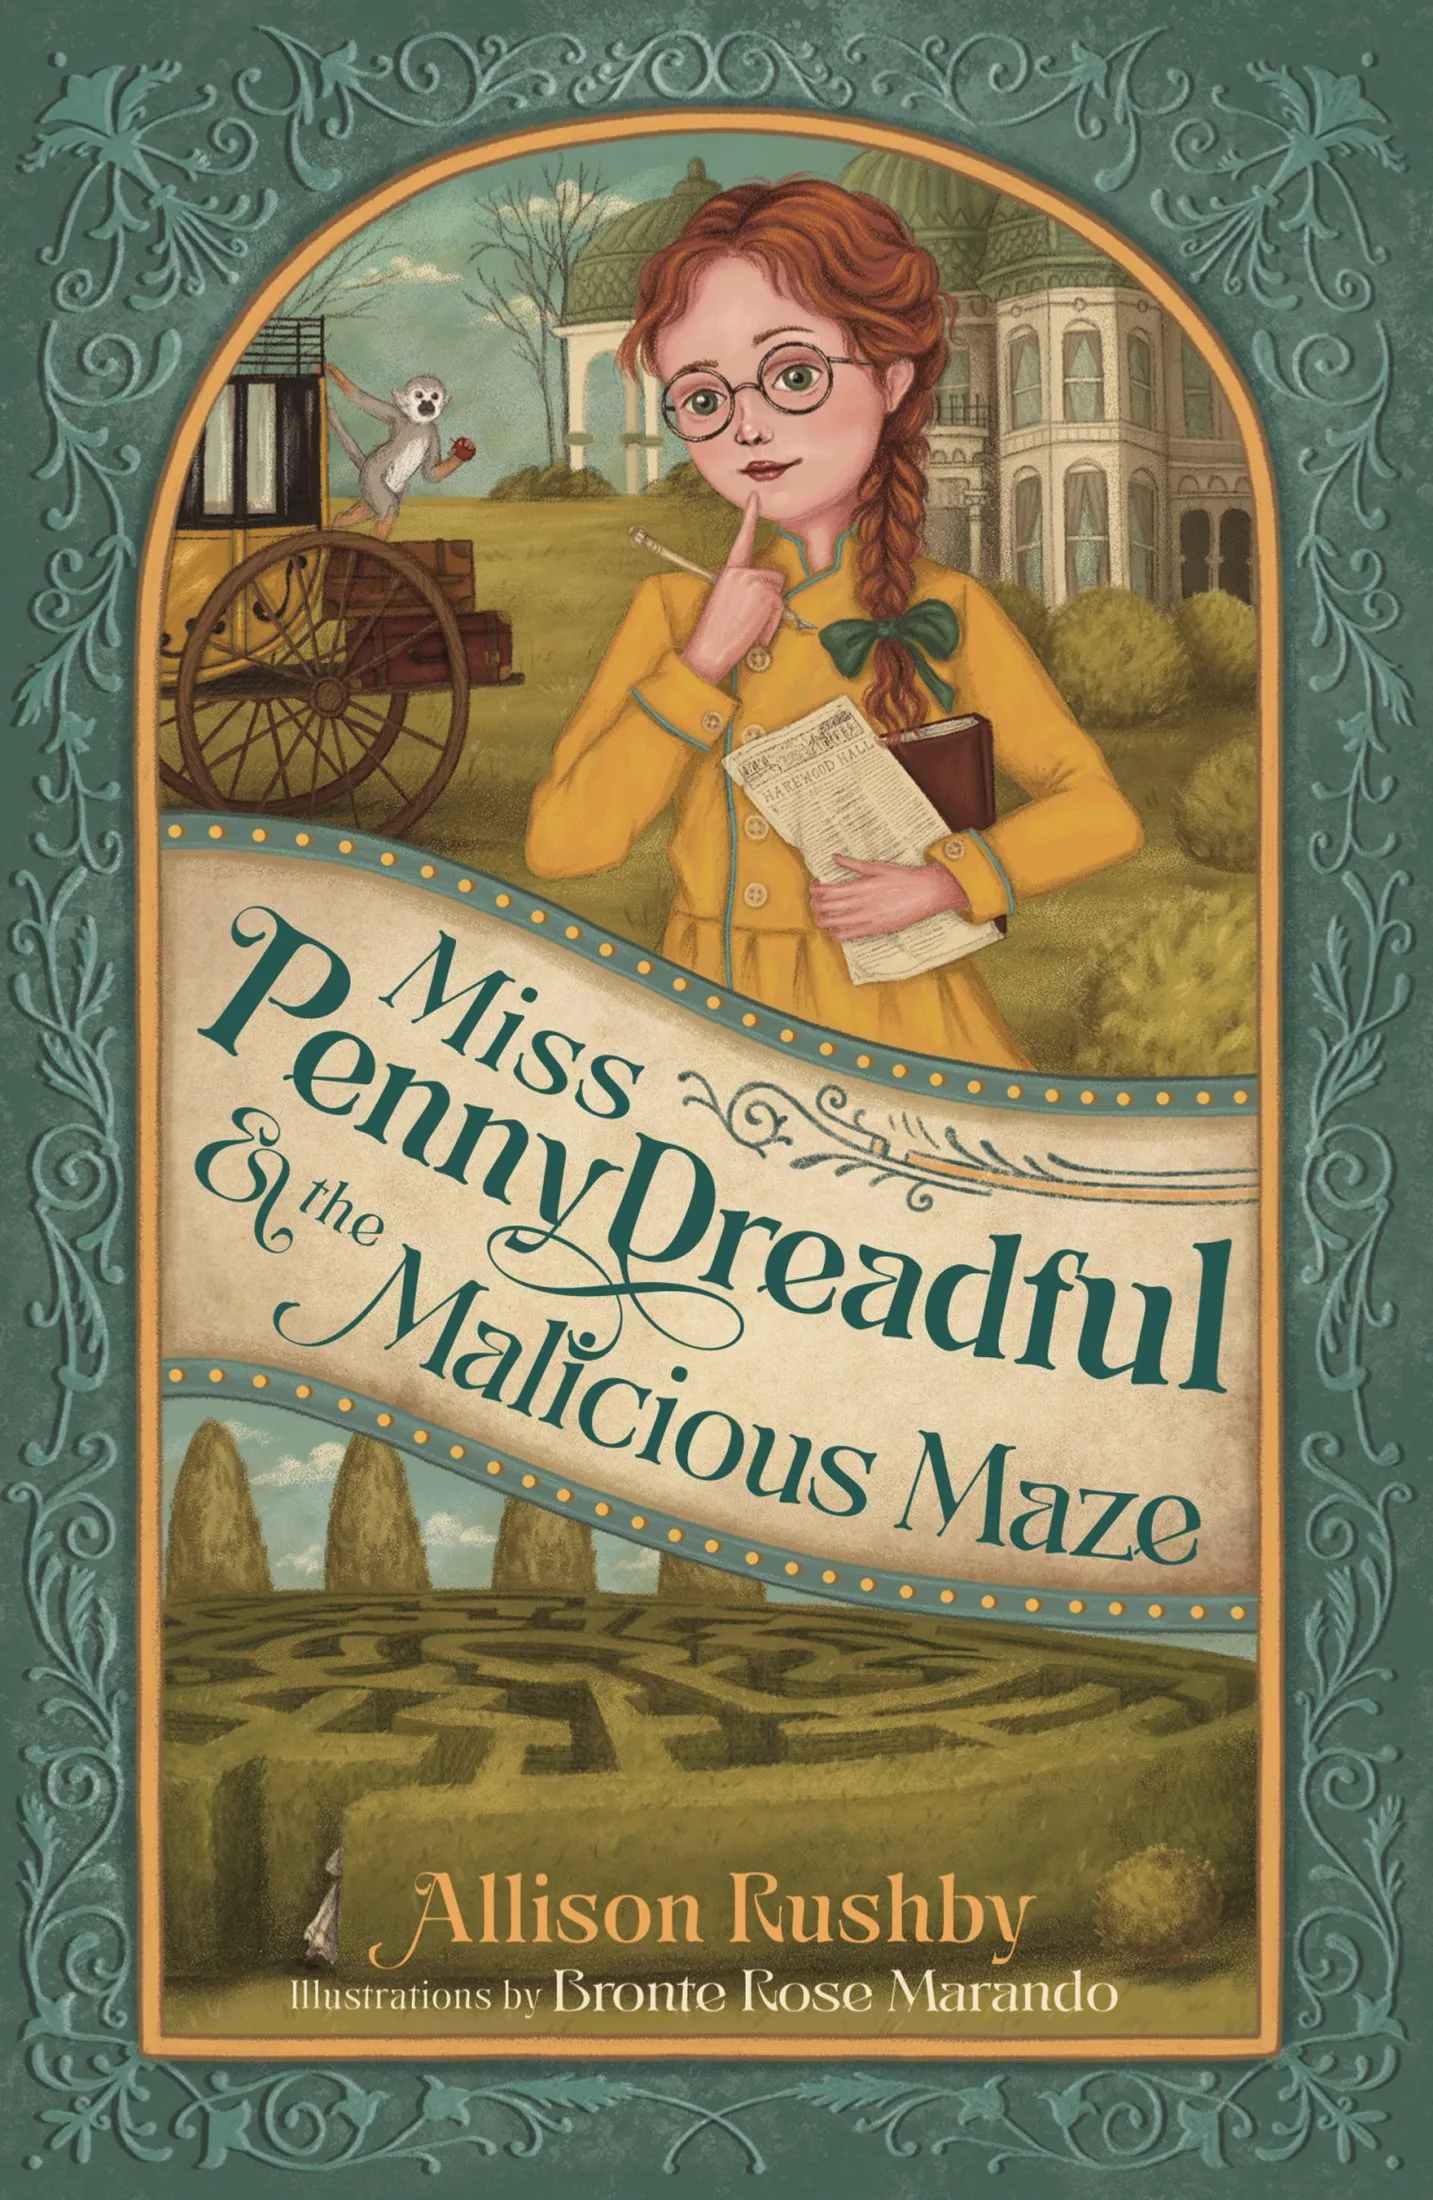 Miss Penny Dreadful and the Malicious Maze (Miss Penny Dreadful #2)